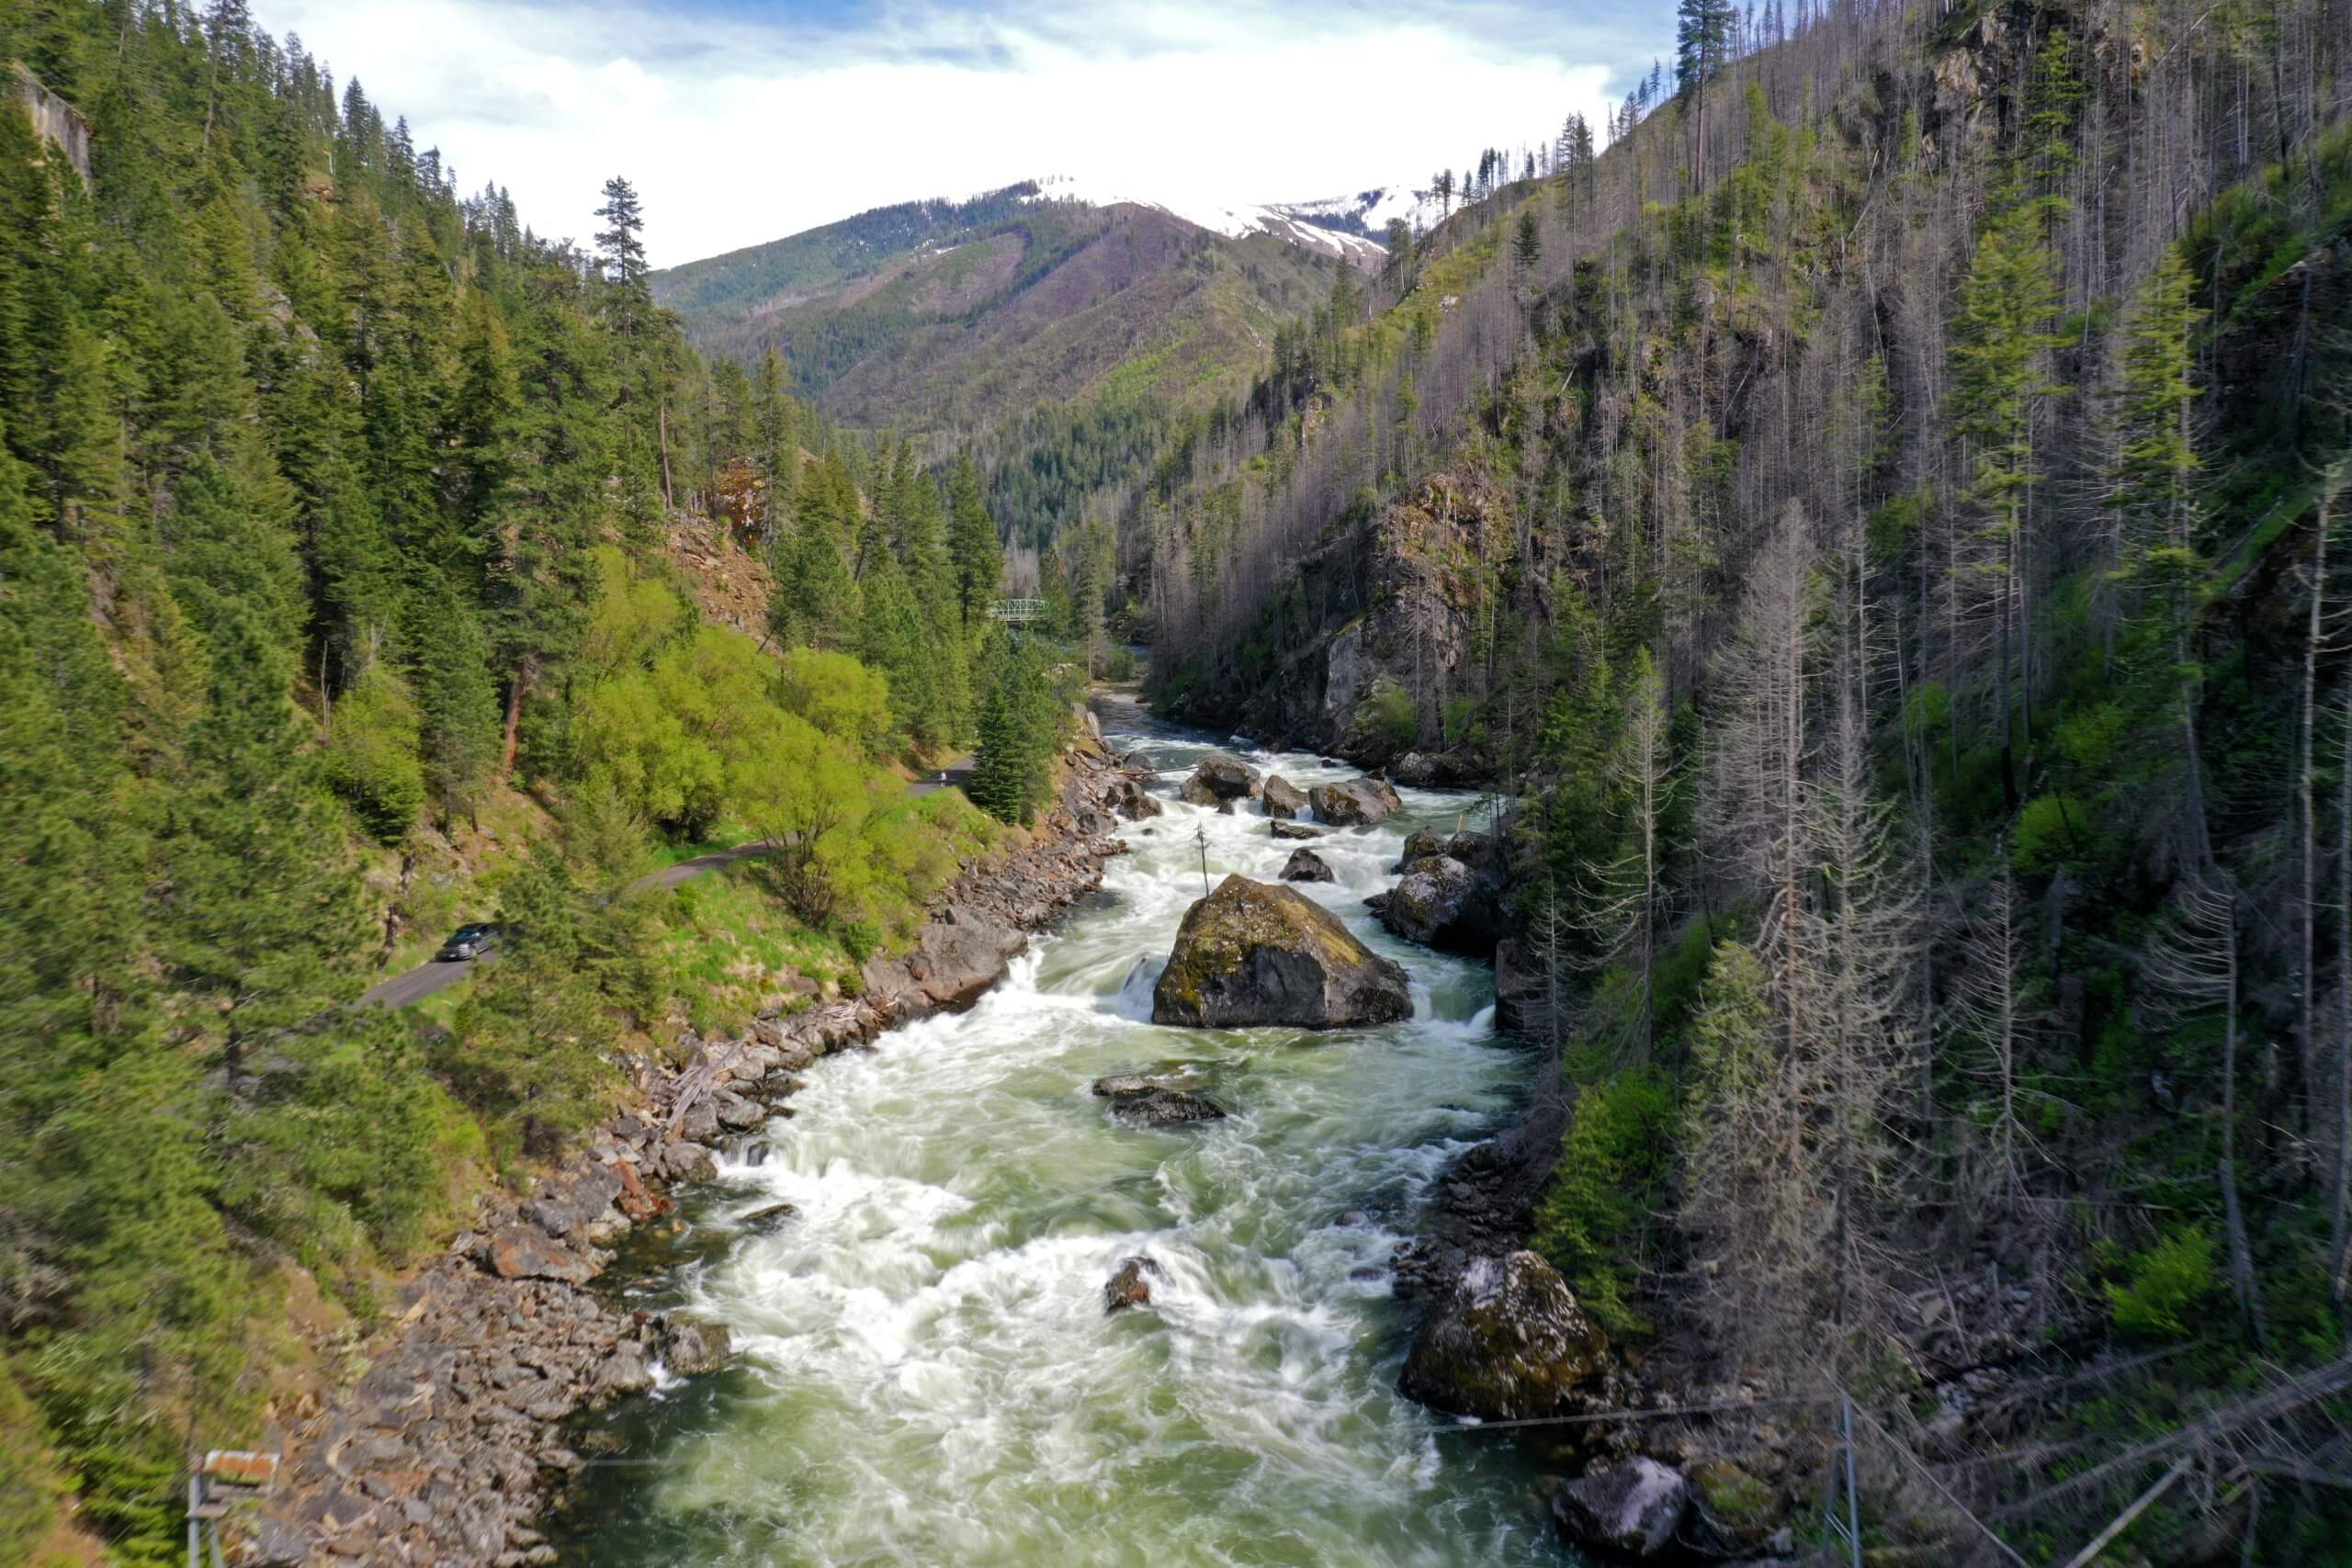 The rushing Selway River surrounded by tree-covered mountains.